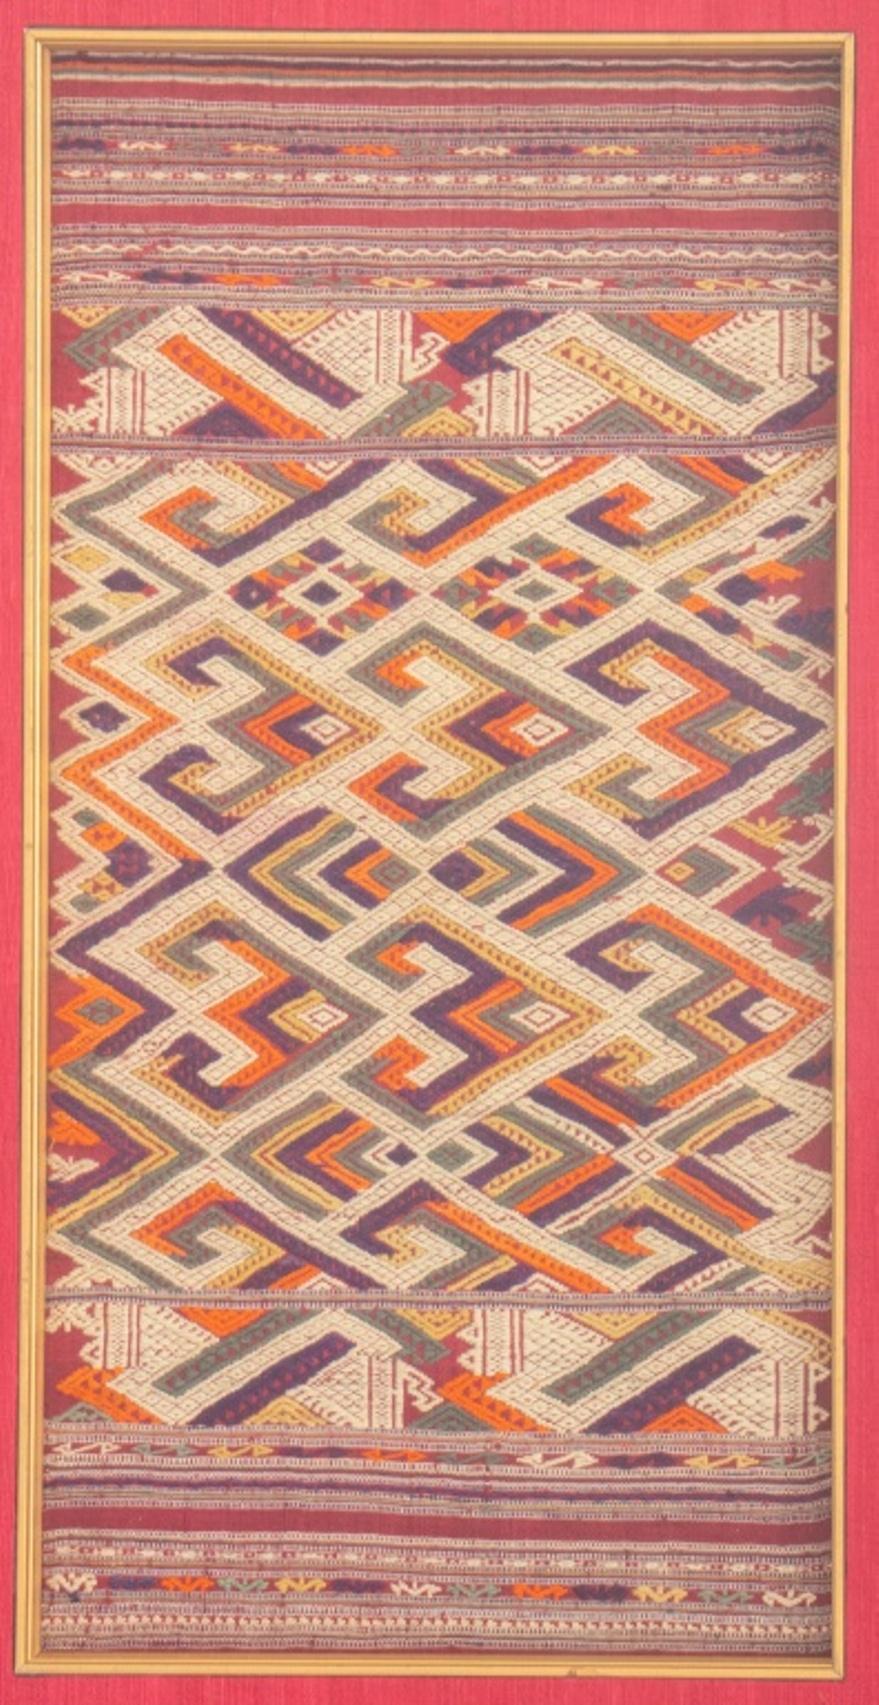 Framed Kilim hand-knotted textile panel. n good vintage condition. Wear consistent with age and use.

Dimensions: Image: 19.5